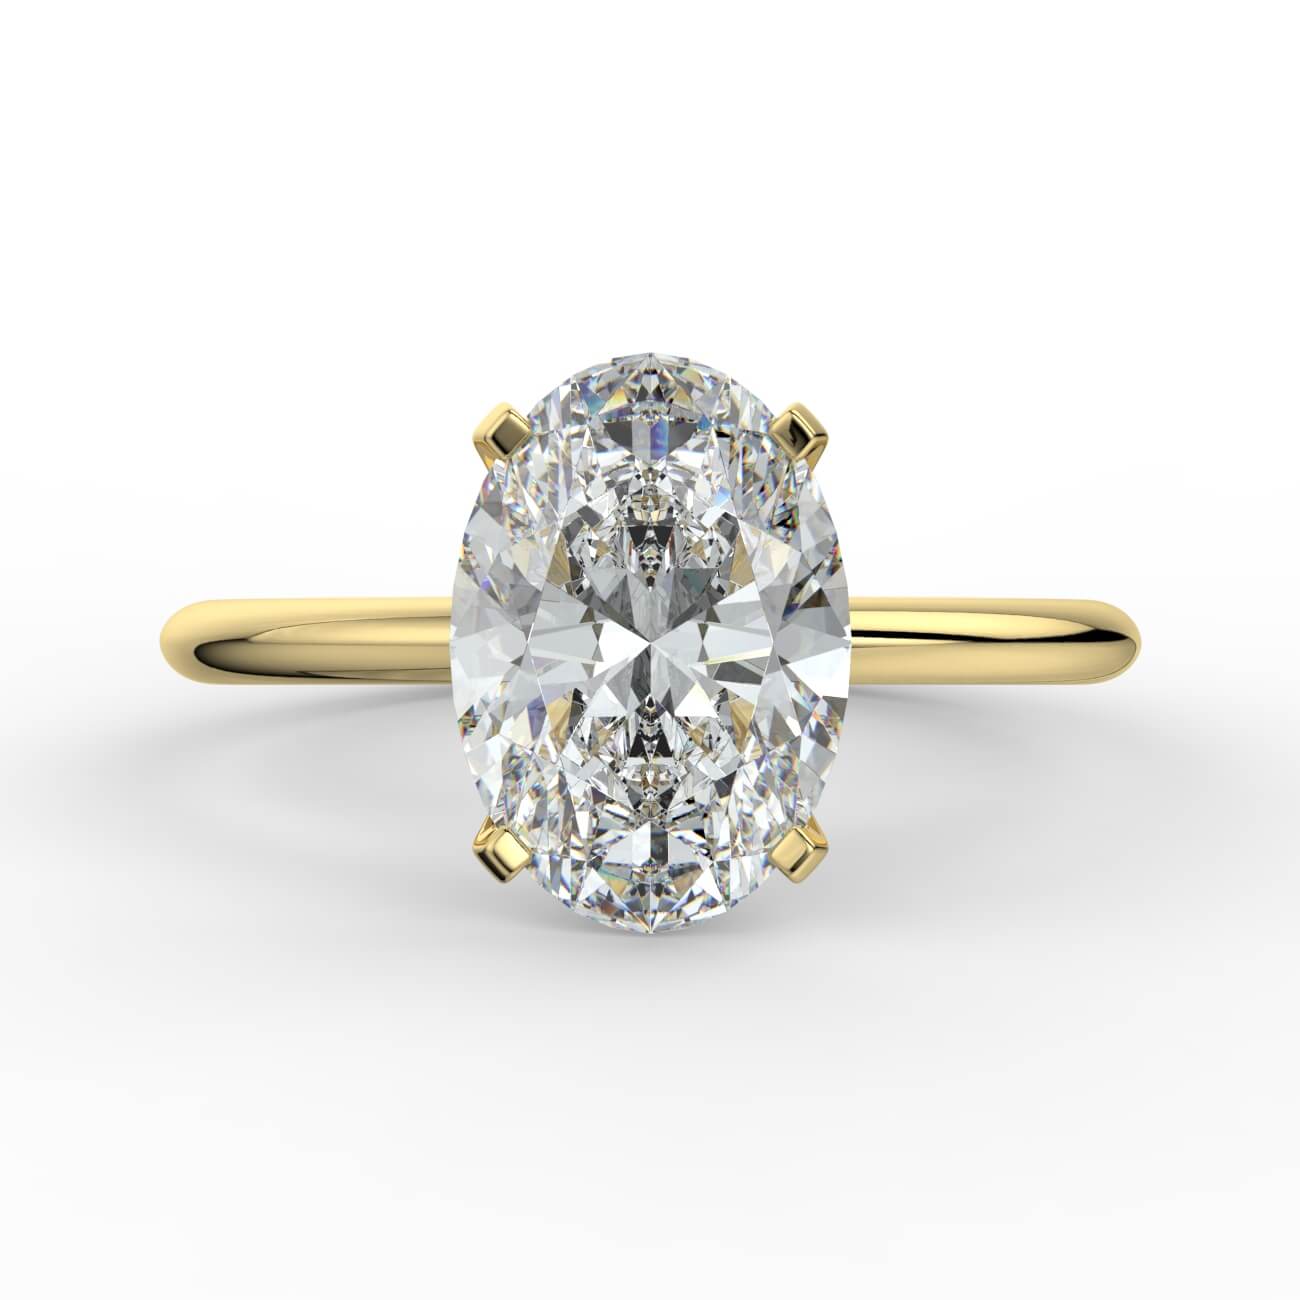 Tapering Solitaire Engagement Ring in yellow gold – Australian Diamond Network